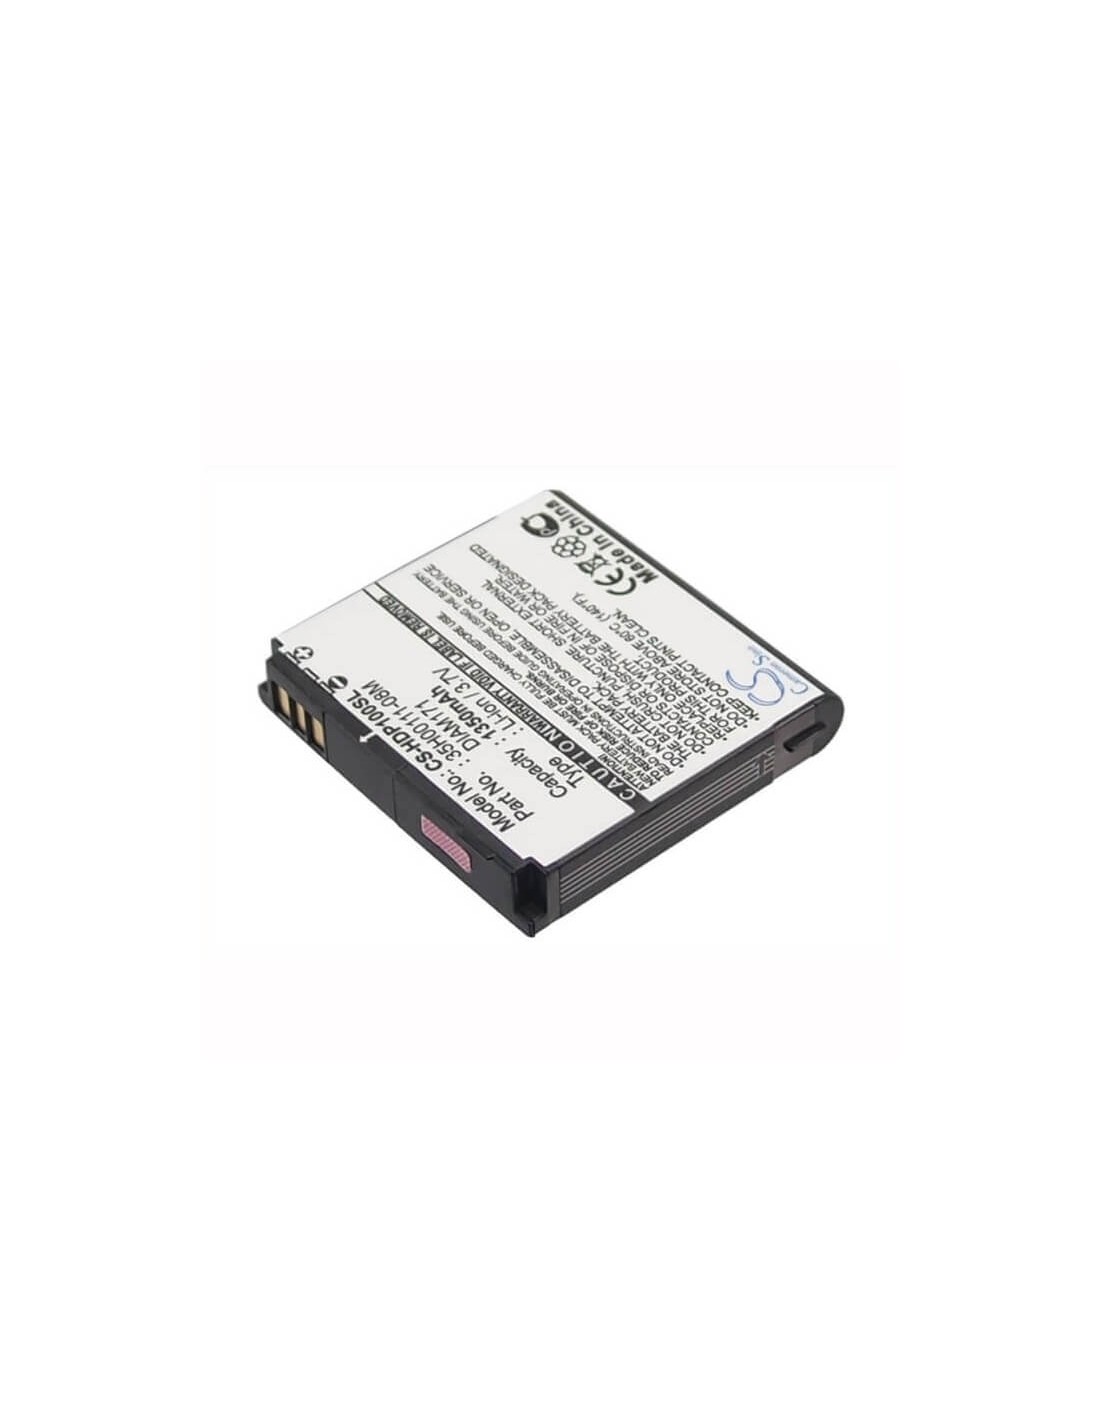 Battery for HTC Touch Pro, T7272, TyTn III 3.7V, 1350mAh - 5.00Wh